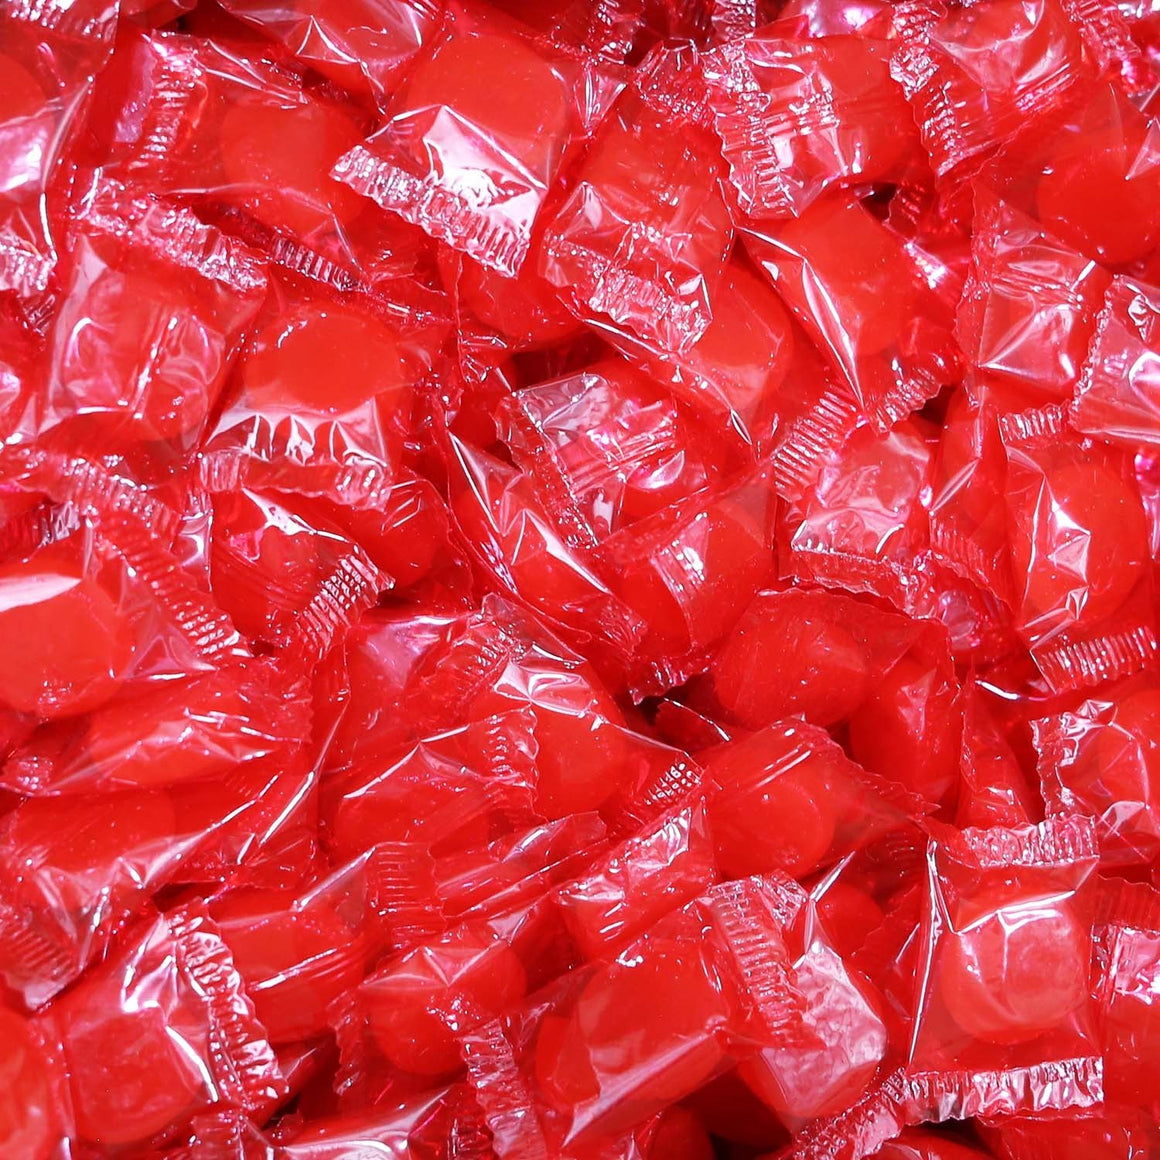 All City Candy Sunrise Cinnamon Disks Hard Candy - 3 LB Bulk Bag Sunrise Confections For fresh candy and great service, visit www.allcitycandy.com